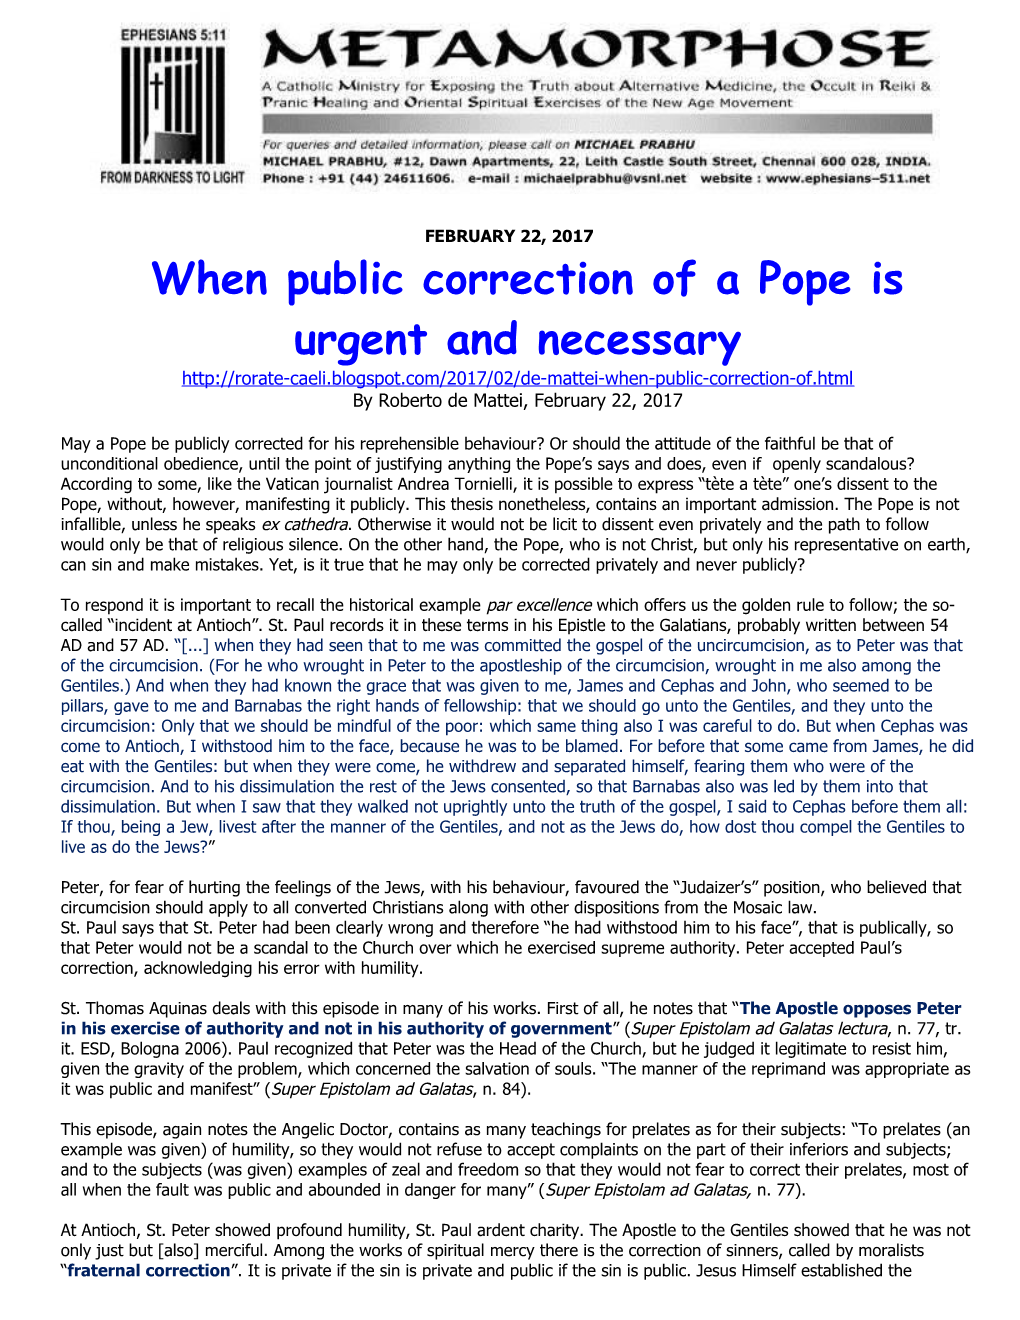 When Public Correction of a Pope Is Urgent and Necessary